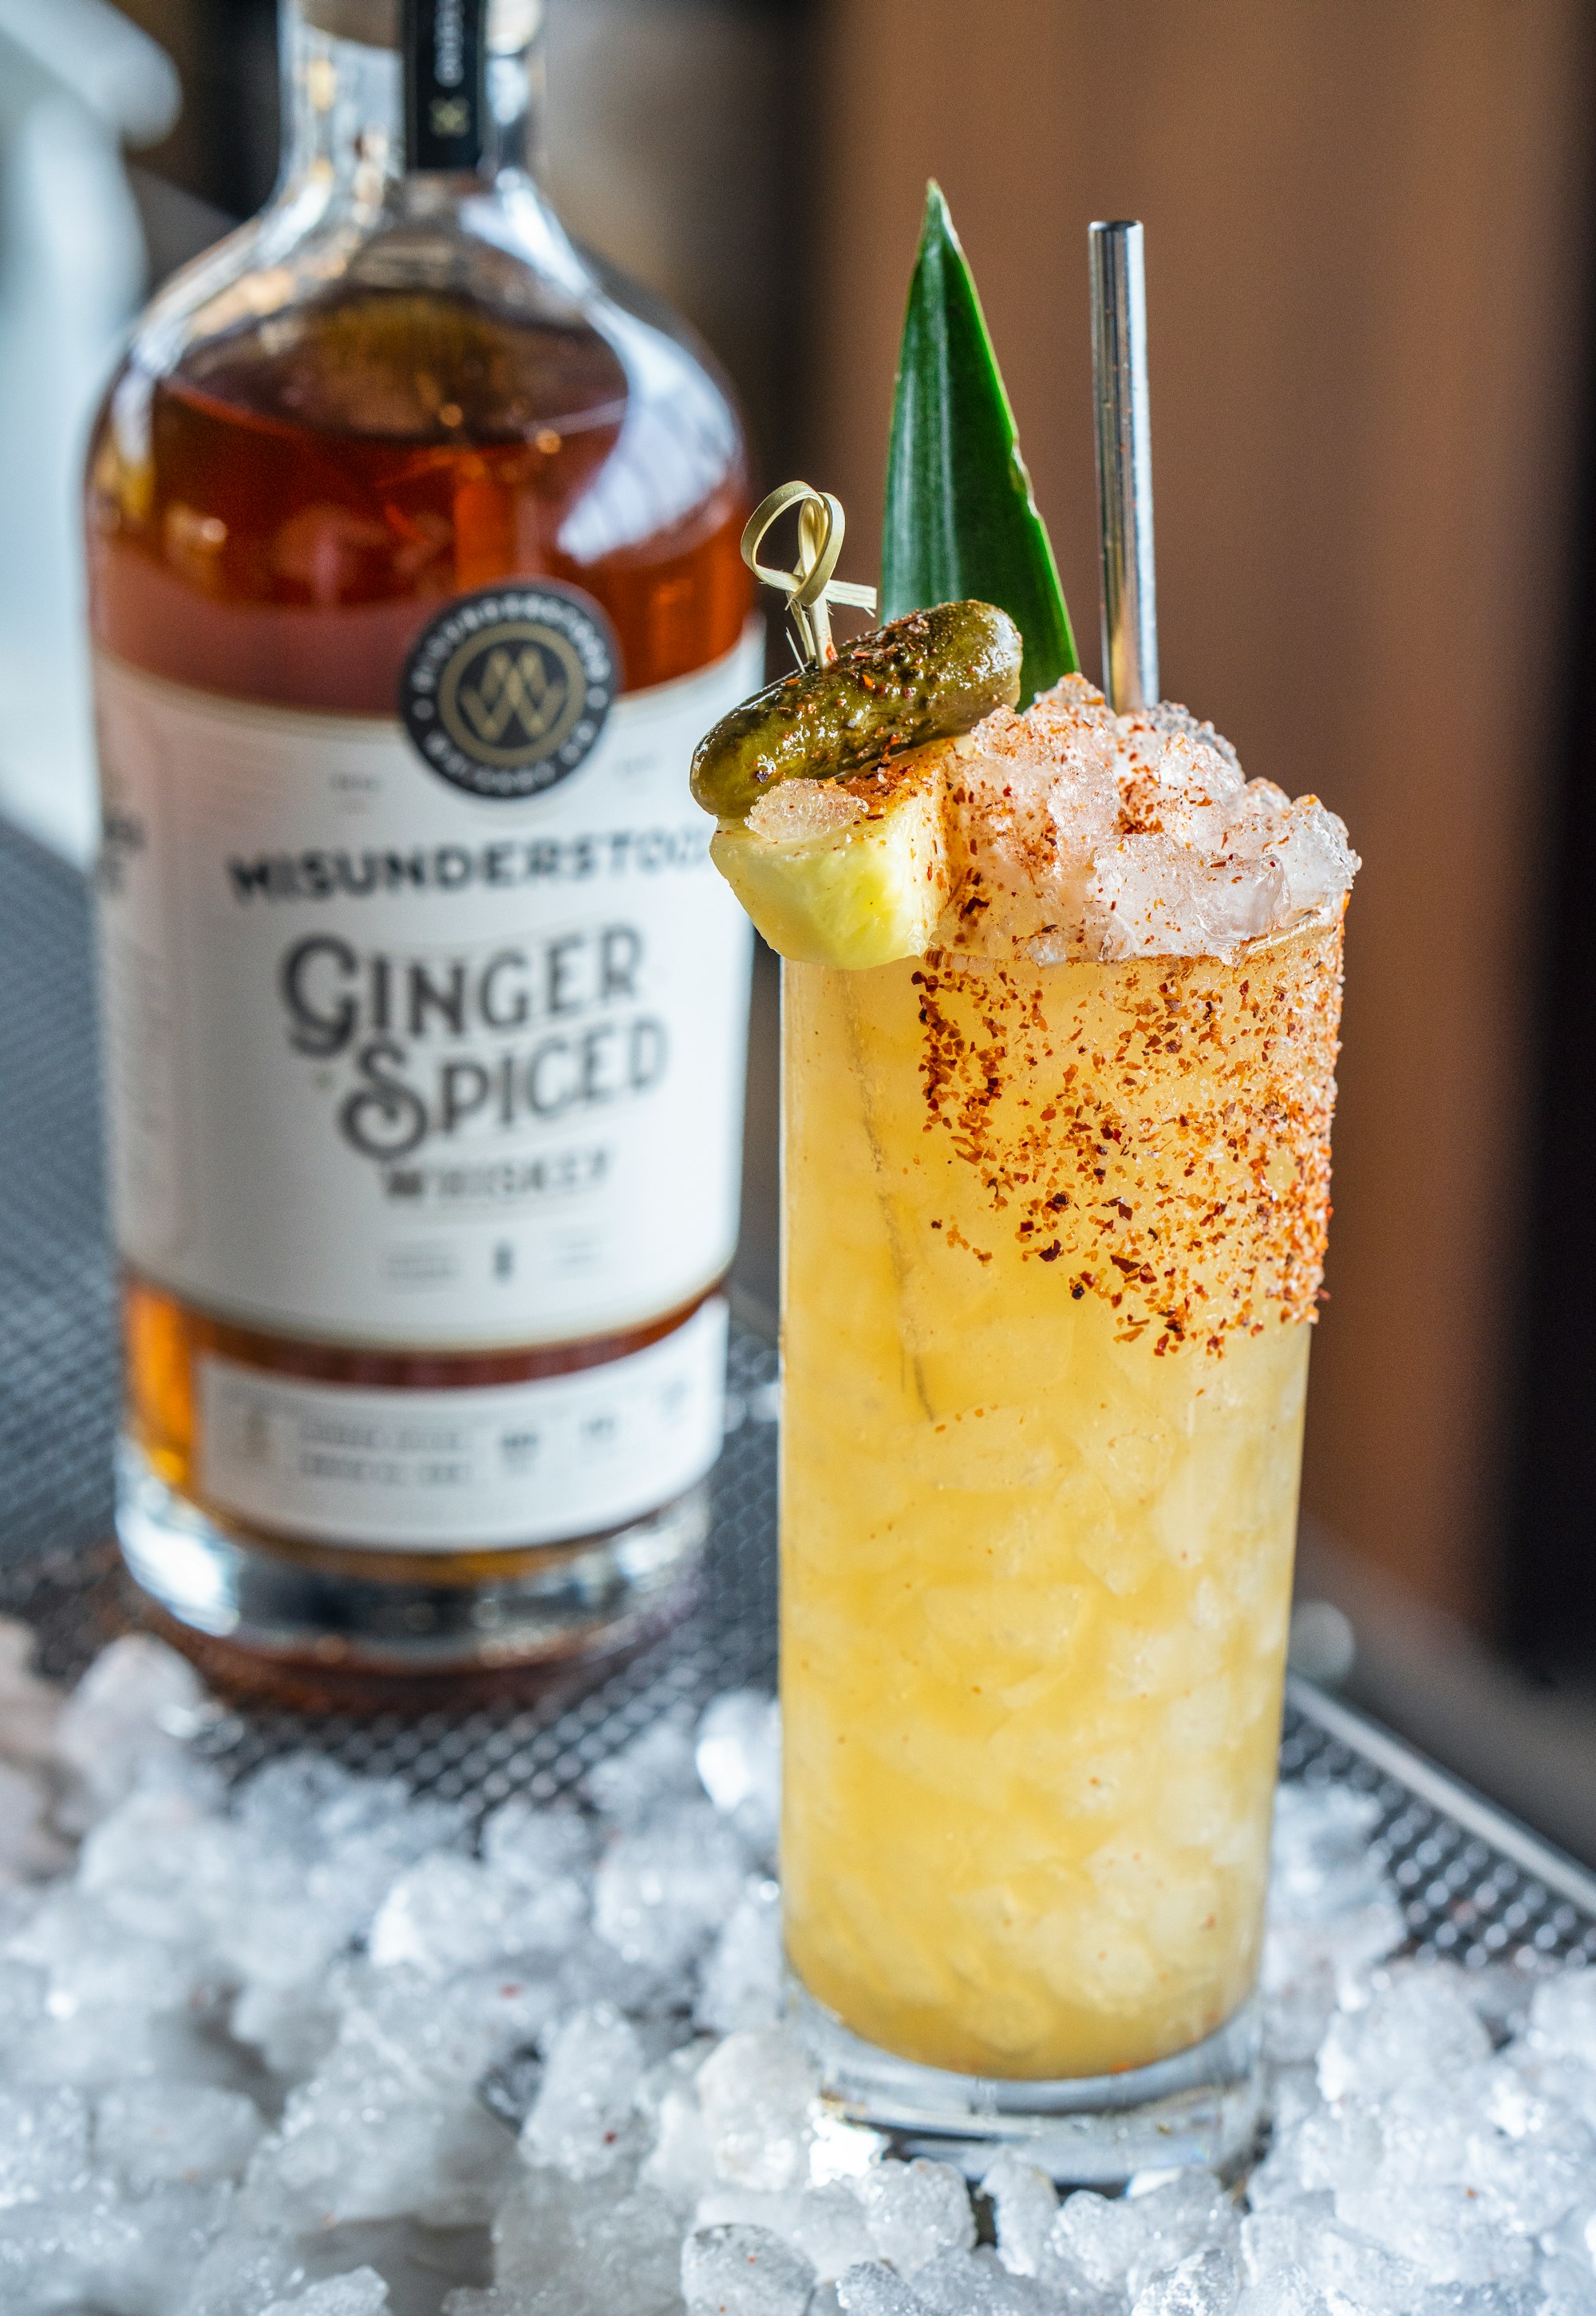 Tiki Pickle cocktail featuring Misunderstood Ginger Spiced Whiskey